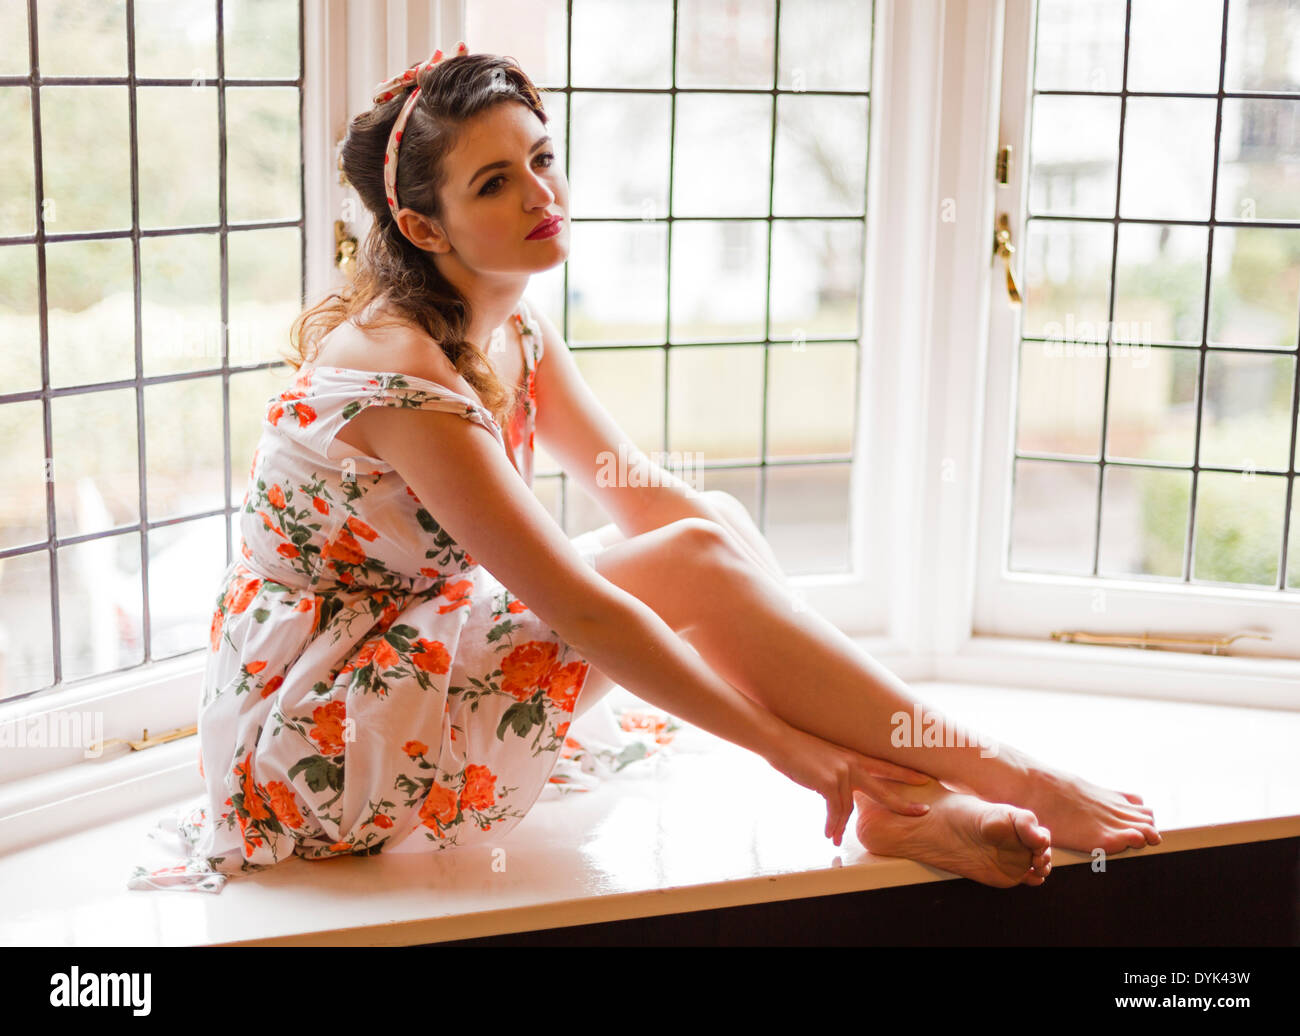 Young woman on a window sill in and old house, lit by natural light, while in a Fifties style summer dress. Stock Photo